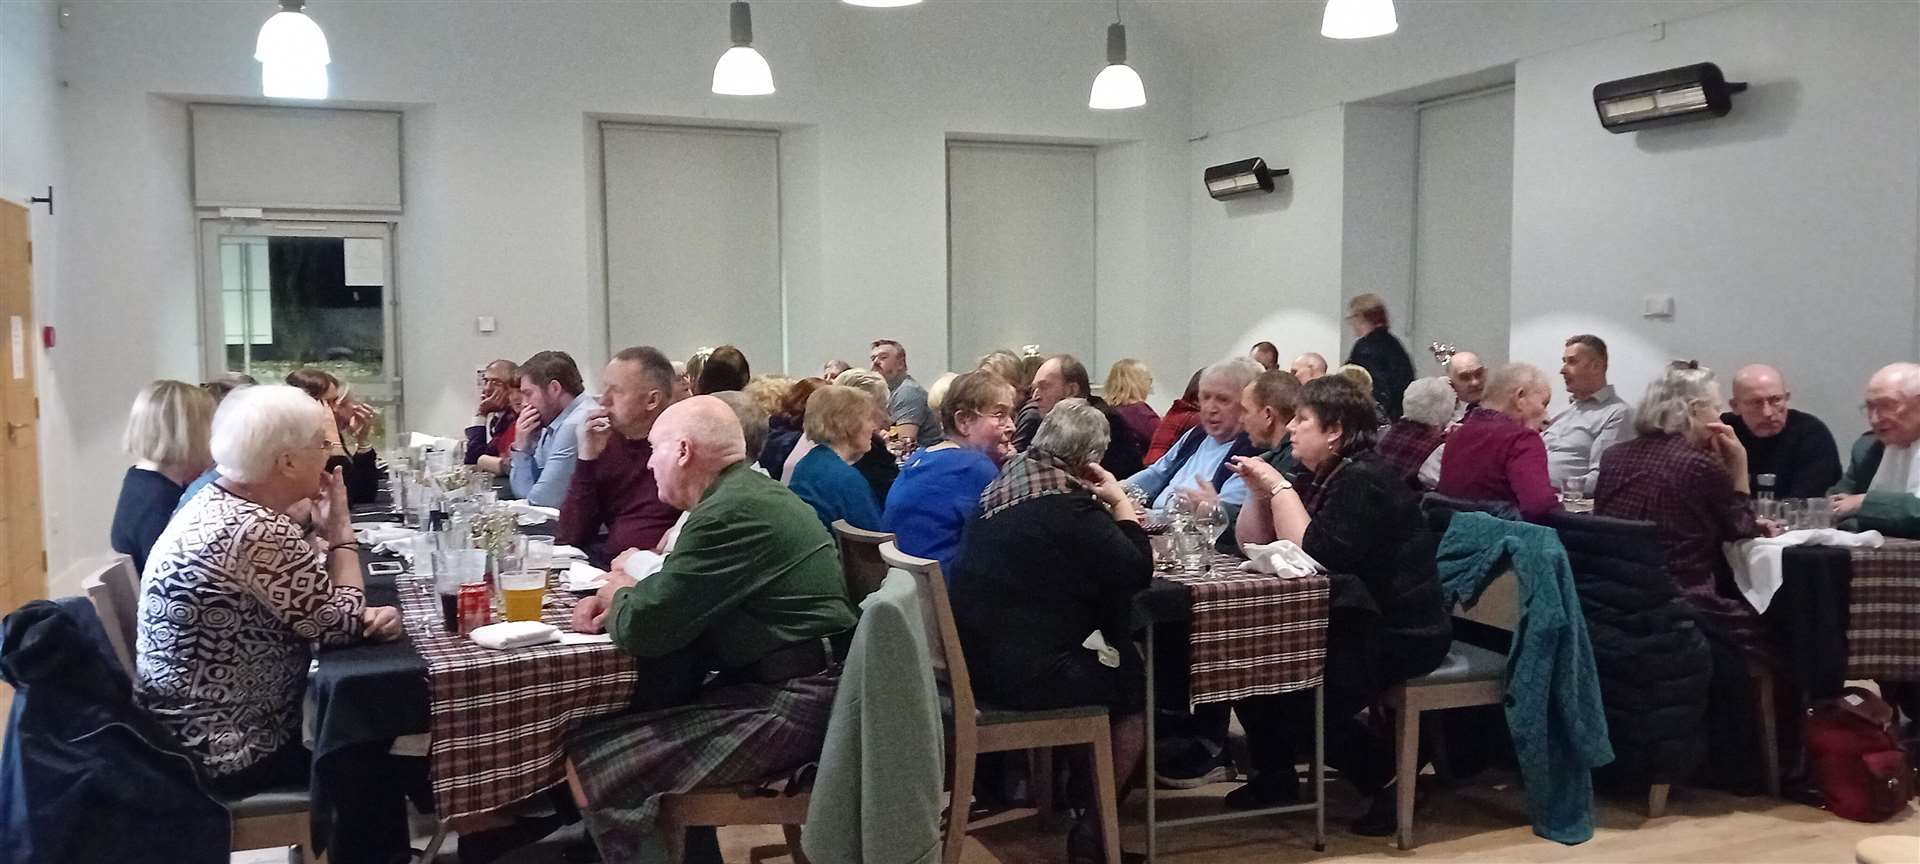 The Burns supper held at the Old School, Embo, was a sell-out.